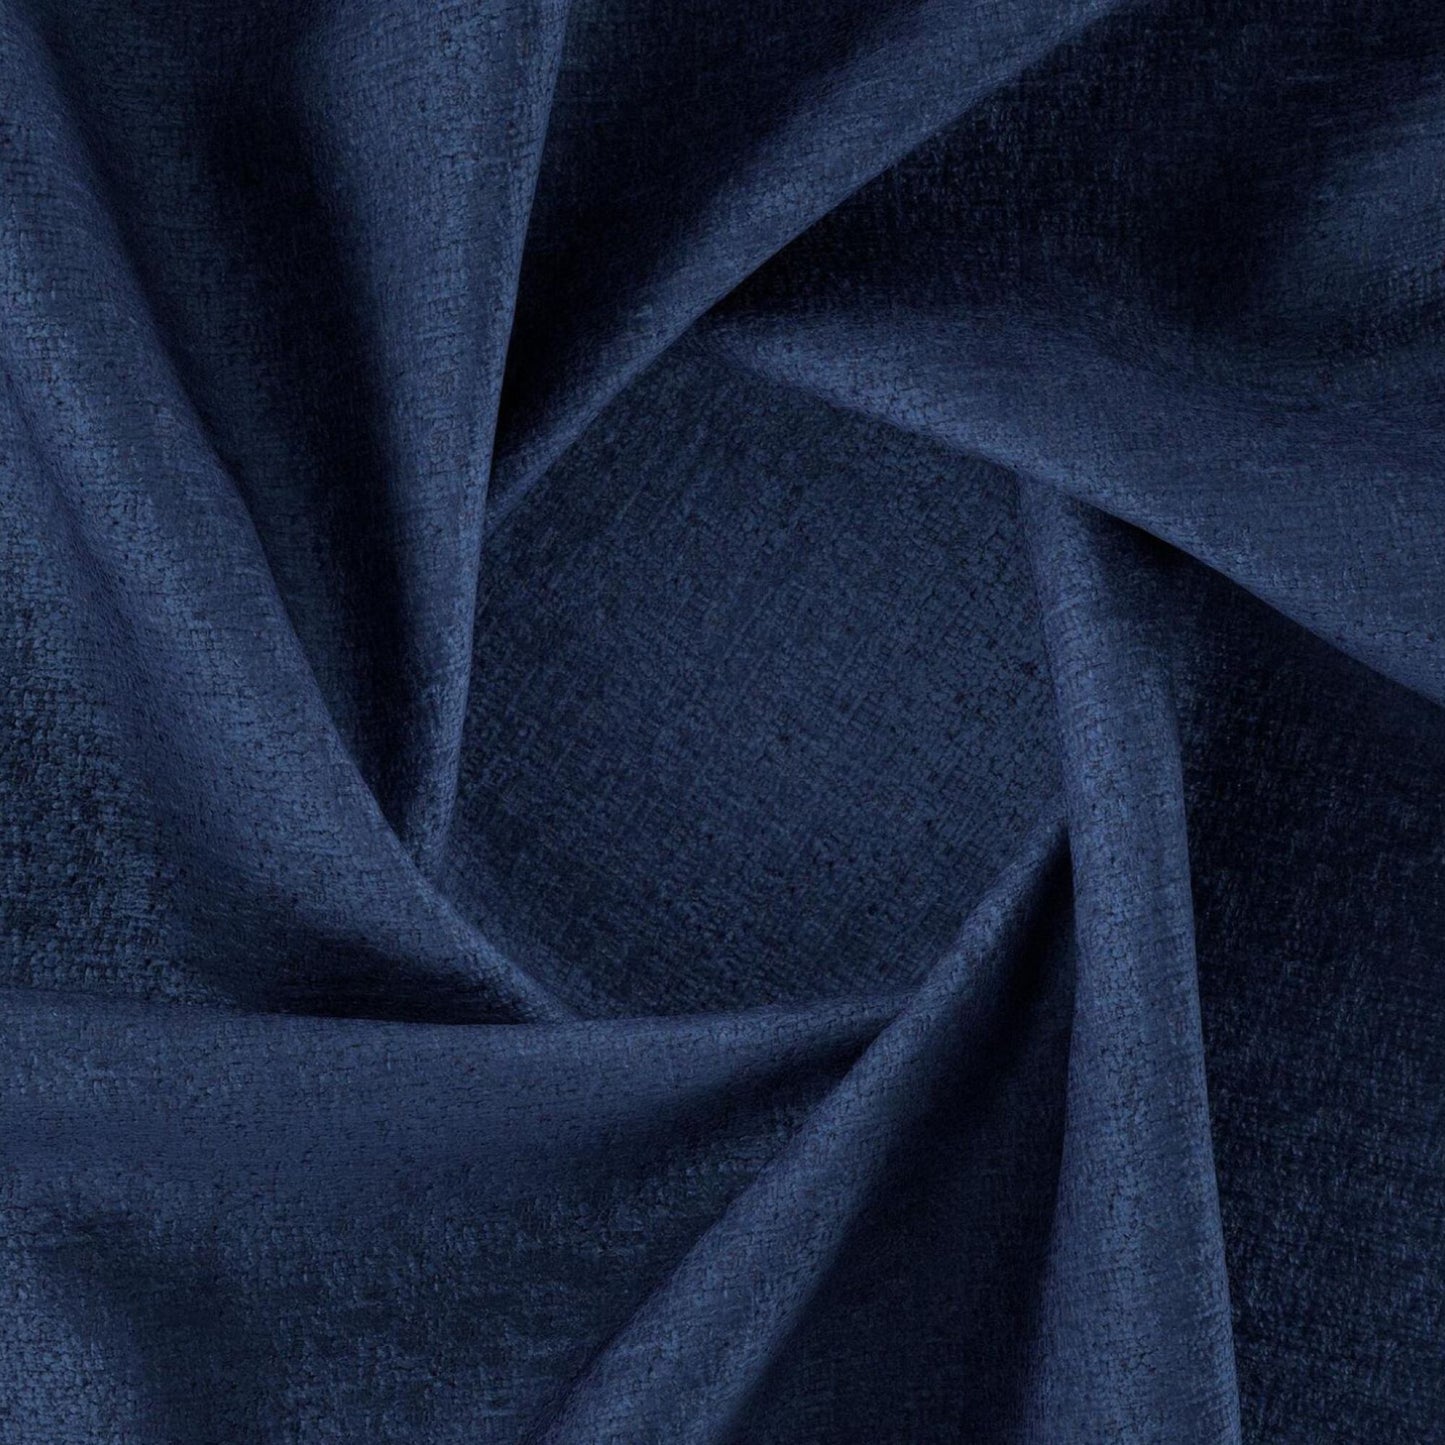 MONSIEUR OCEAN LUXURY CHENILLE FABRIC SAMPLE | SPECIAL COLLECTION | # 2